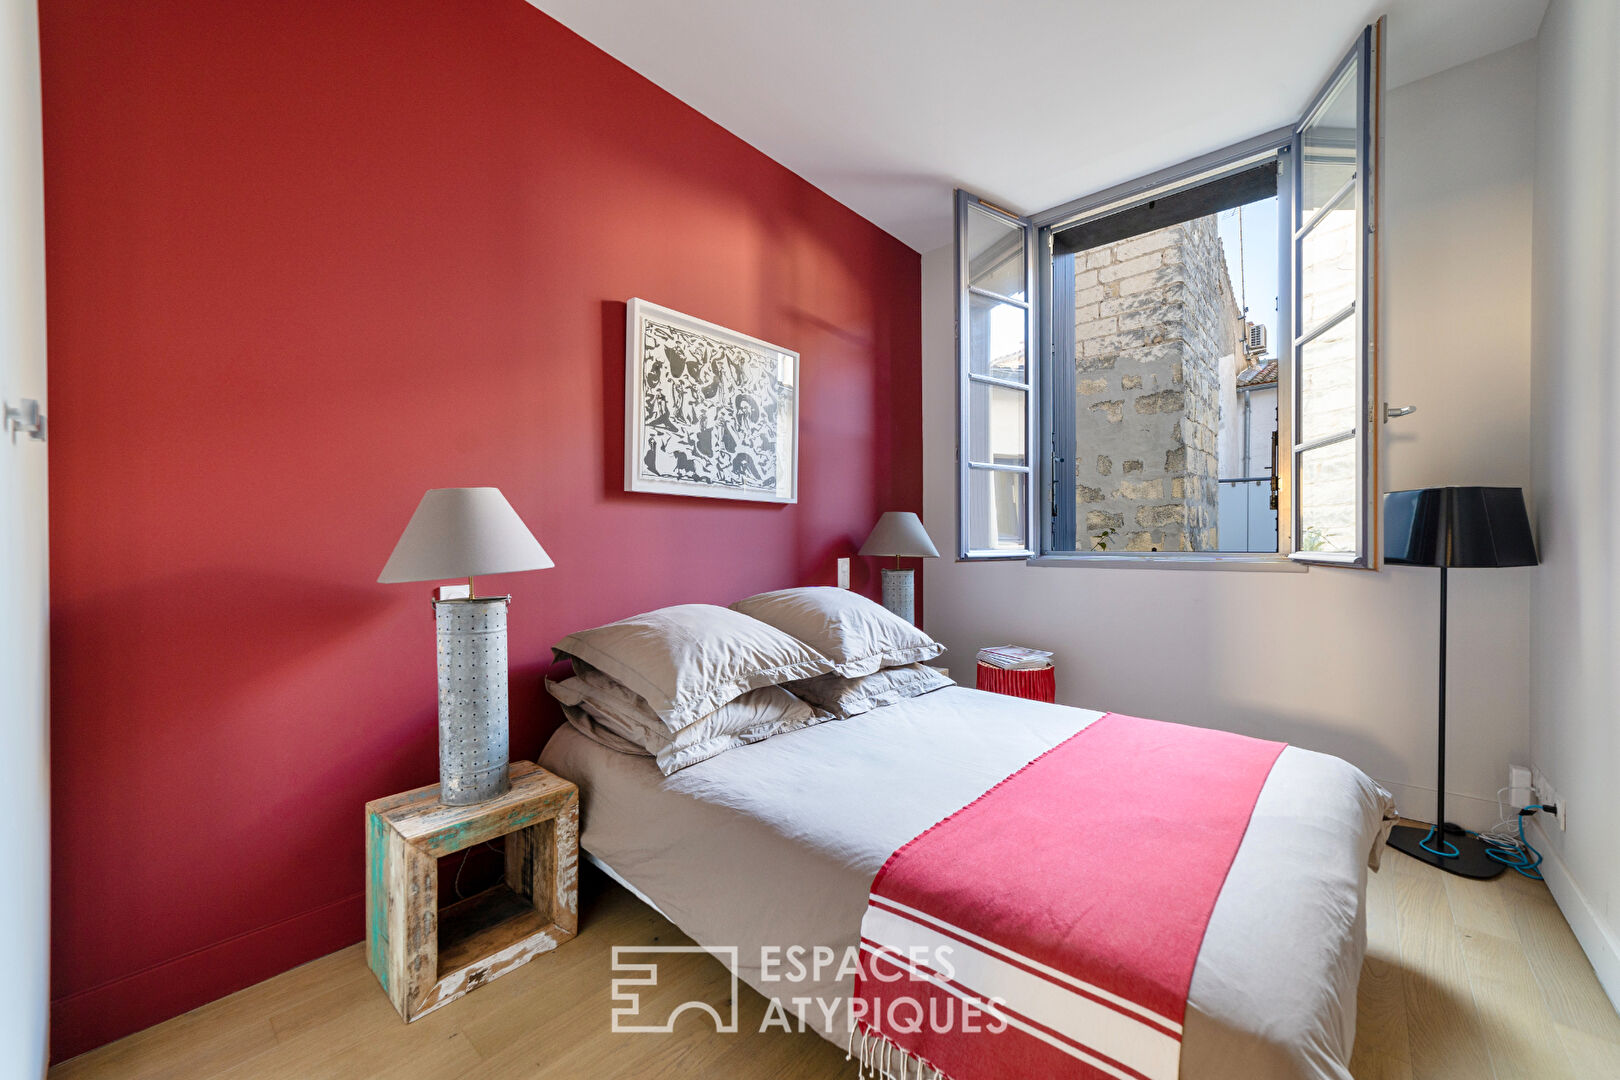 Superb renovation in the heart of the medieval city